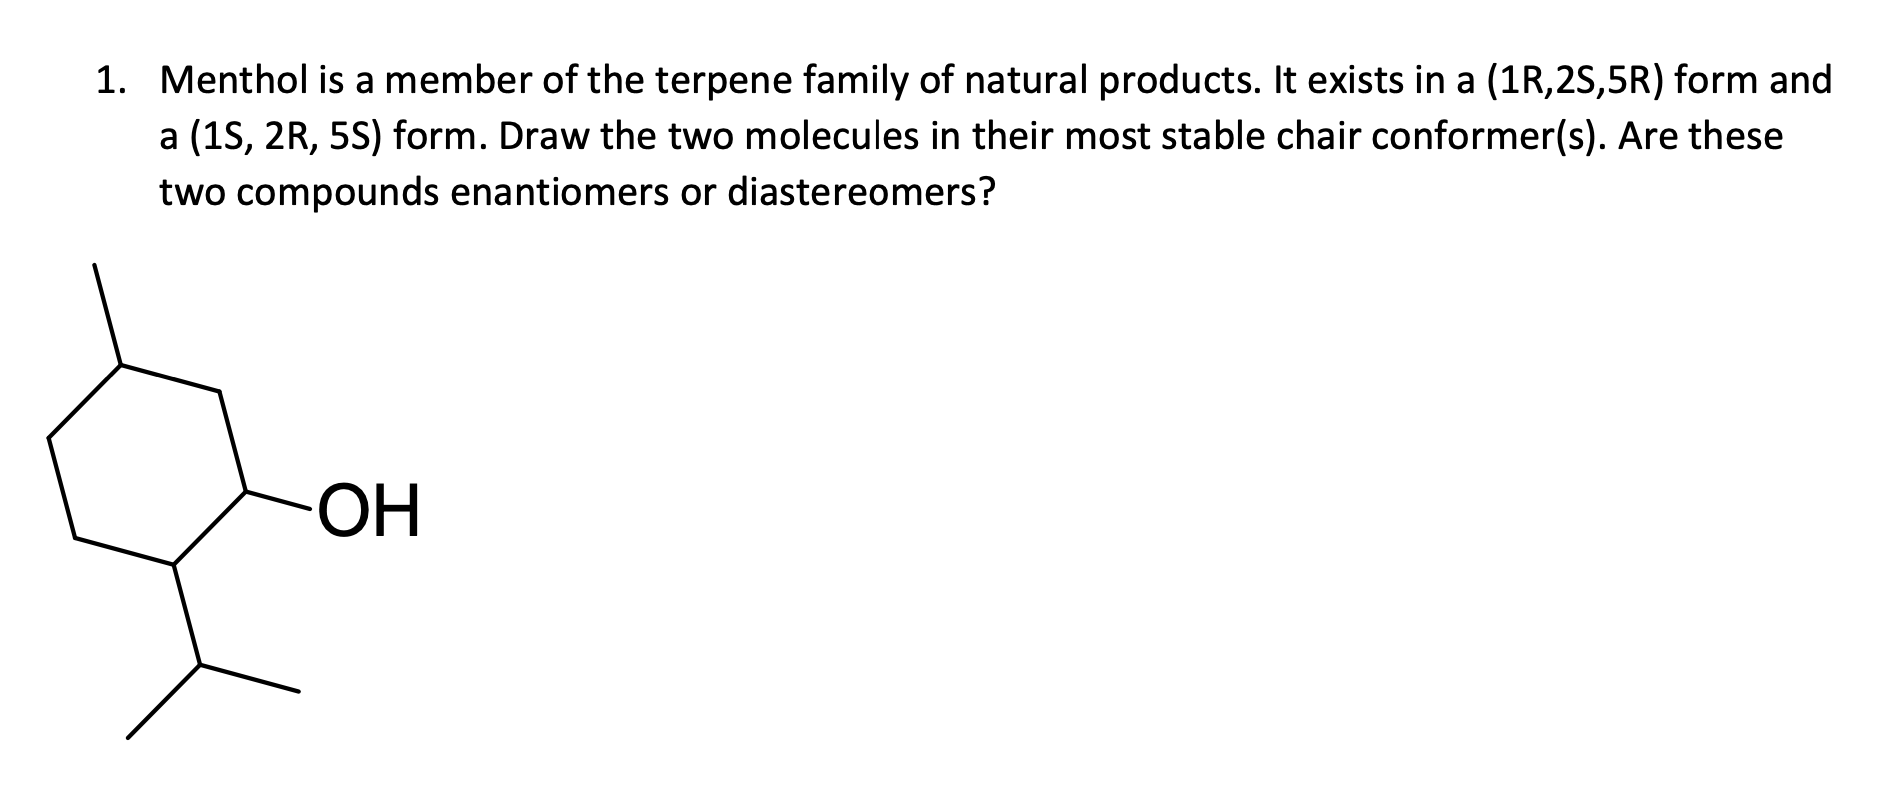 1. Menthol is a member of the terpene family of natural products. It exists in a (1R,2S,5R) form and
a (1S, 2R, 5S) form. Draw the two molecules in their most stable chair conformer(s). Are these
two compounds enantiomers or diastereomers?
ОН
